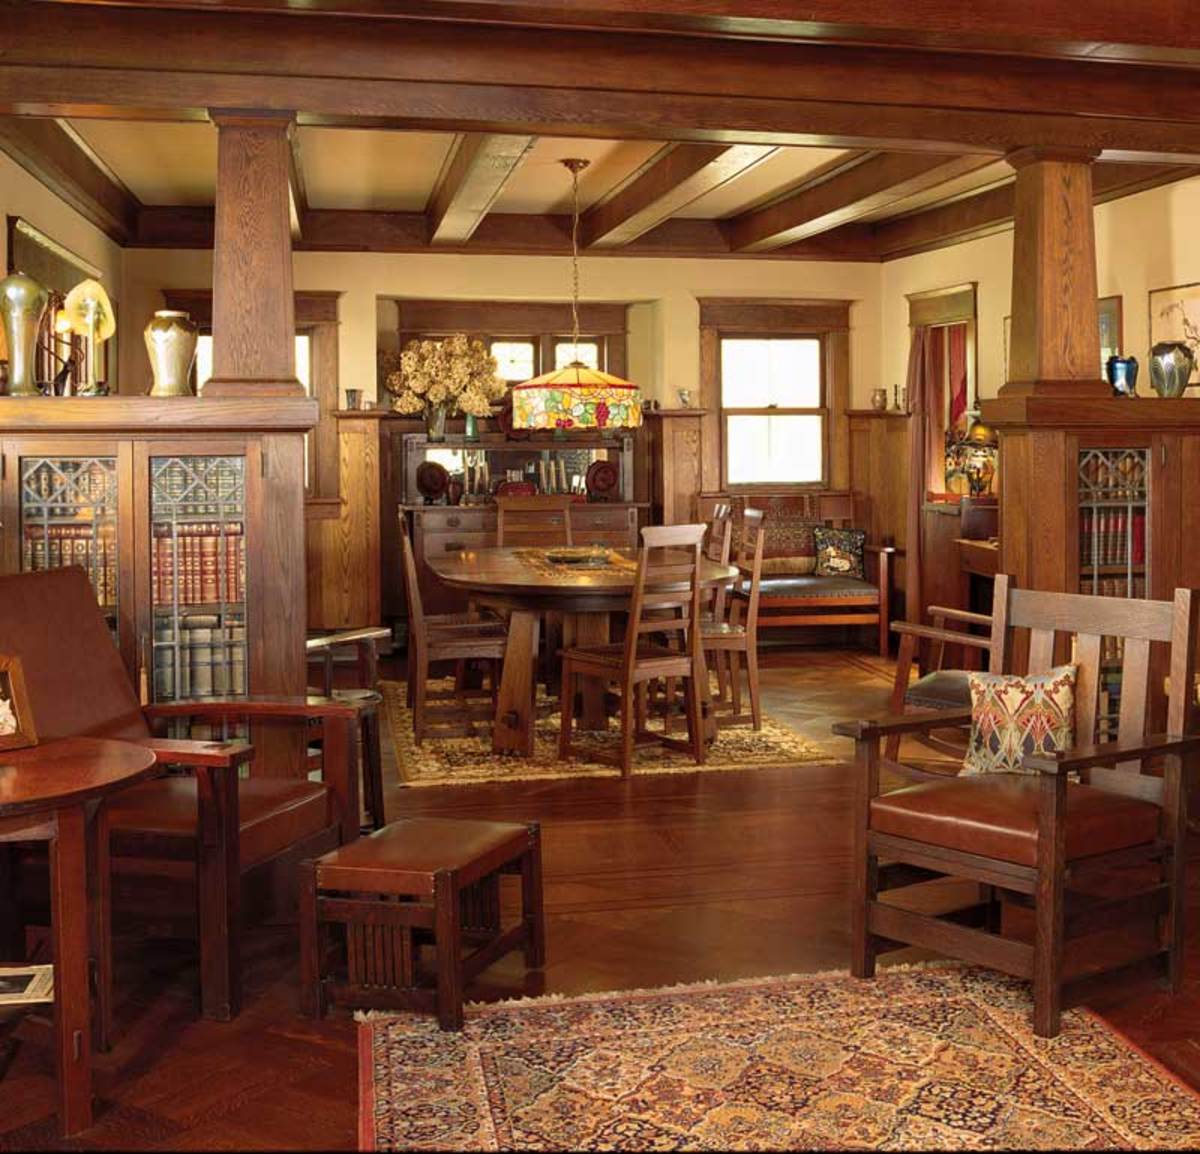 Original woodwork was restored by the owners of a modest stone and shingle bungalow in rural New York. Photo: Dan Mayers